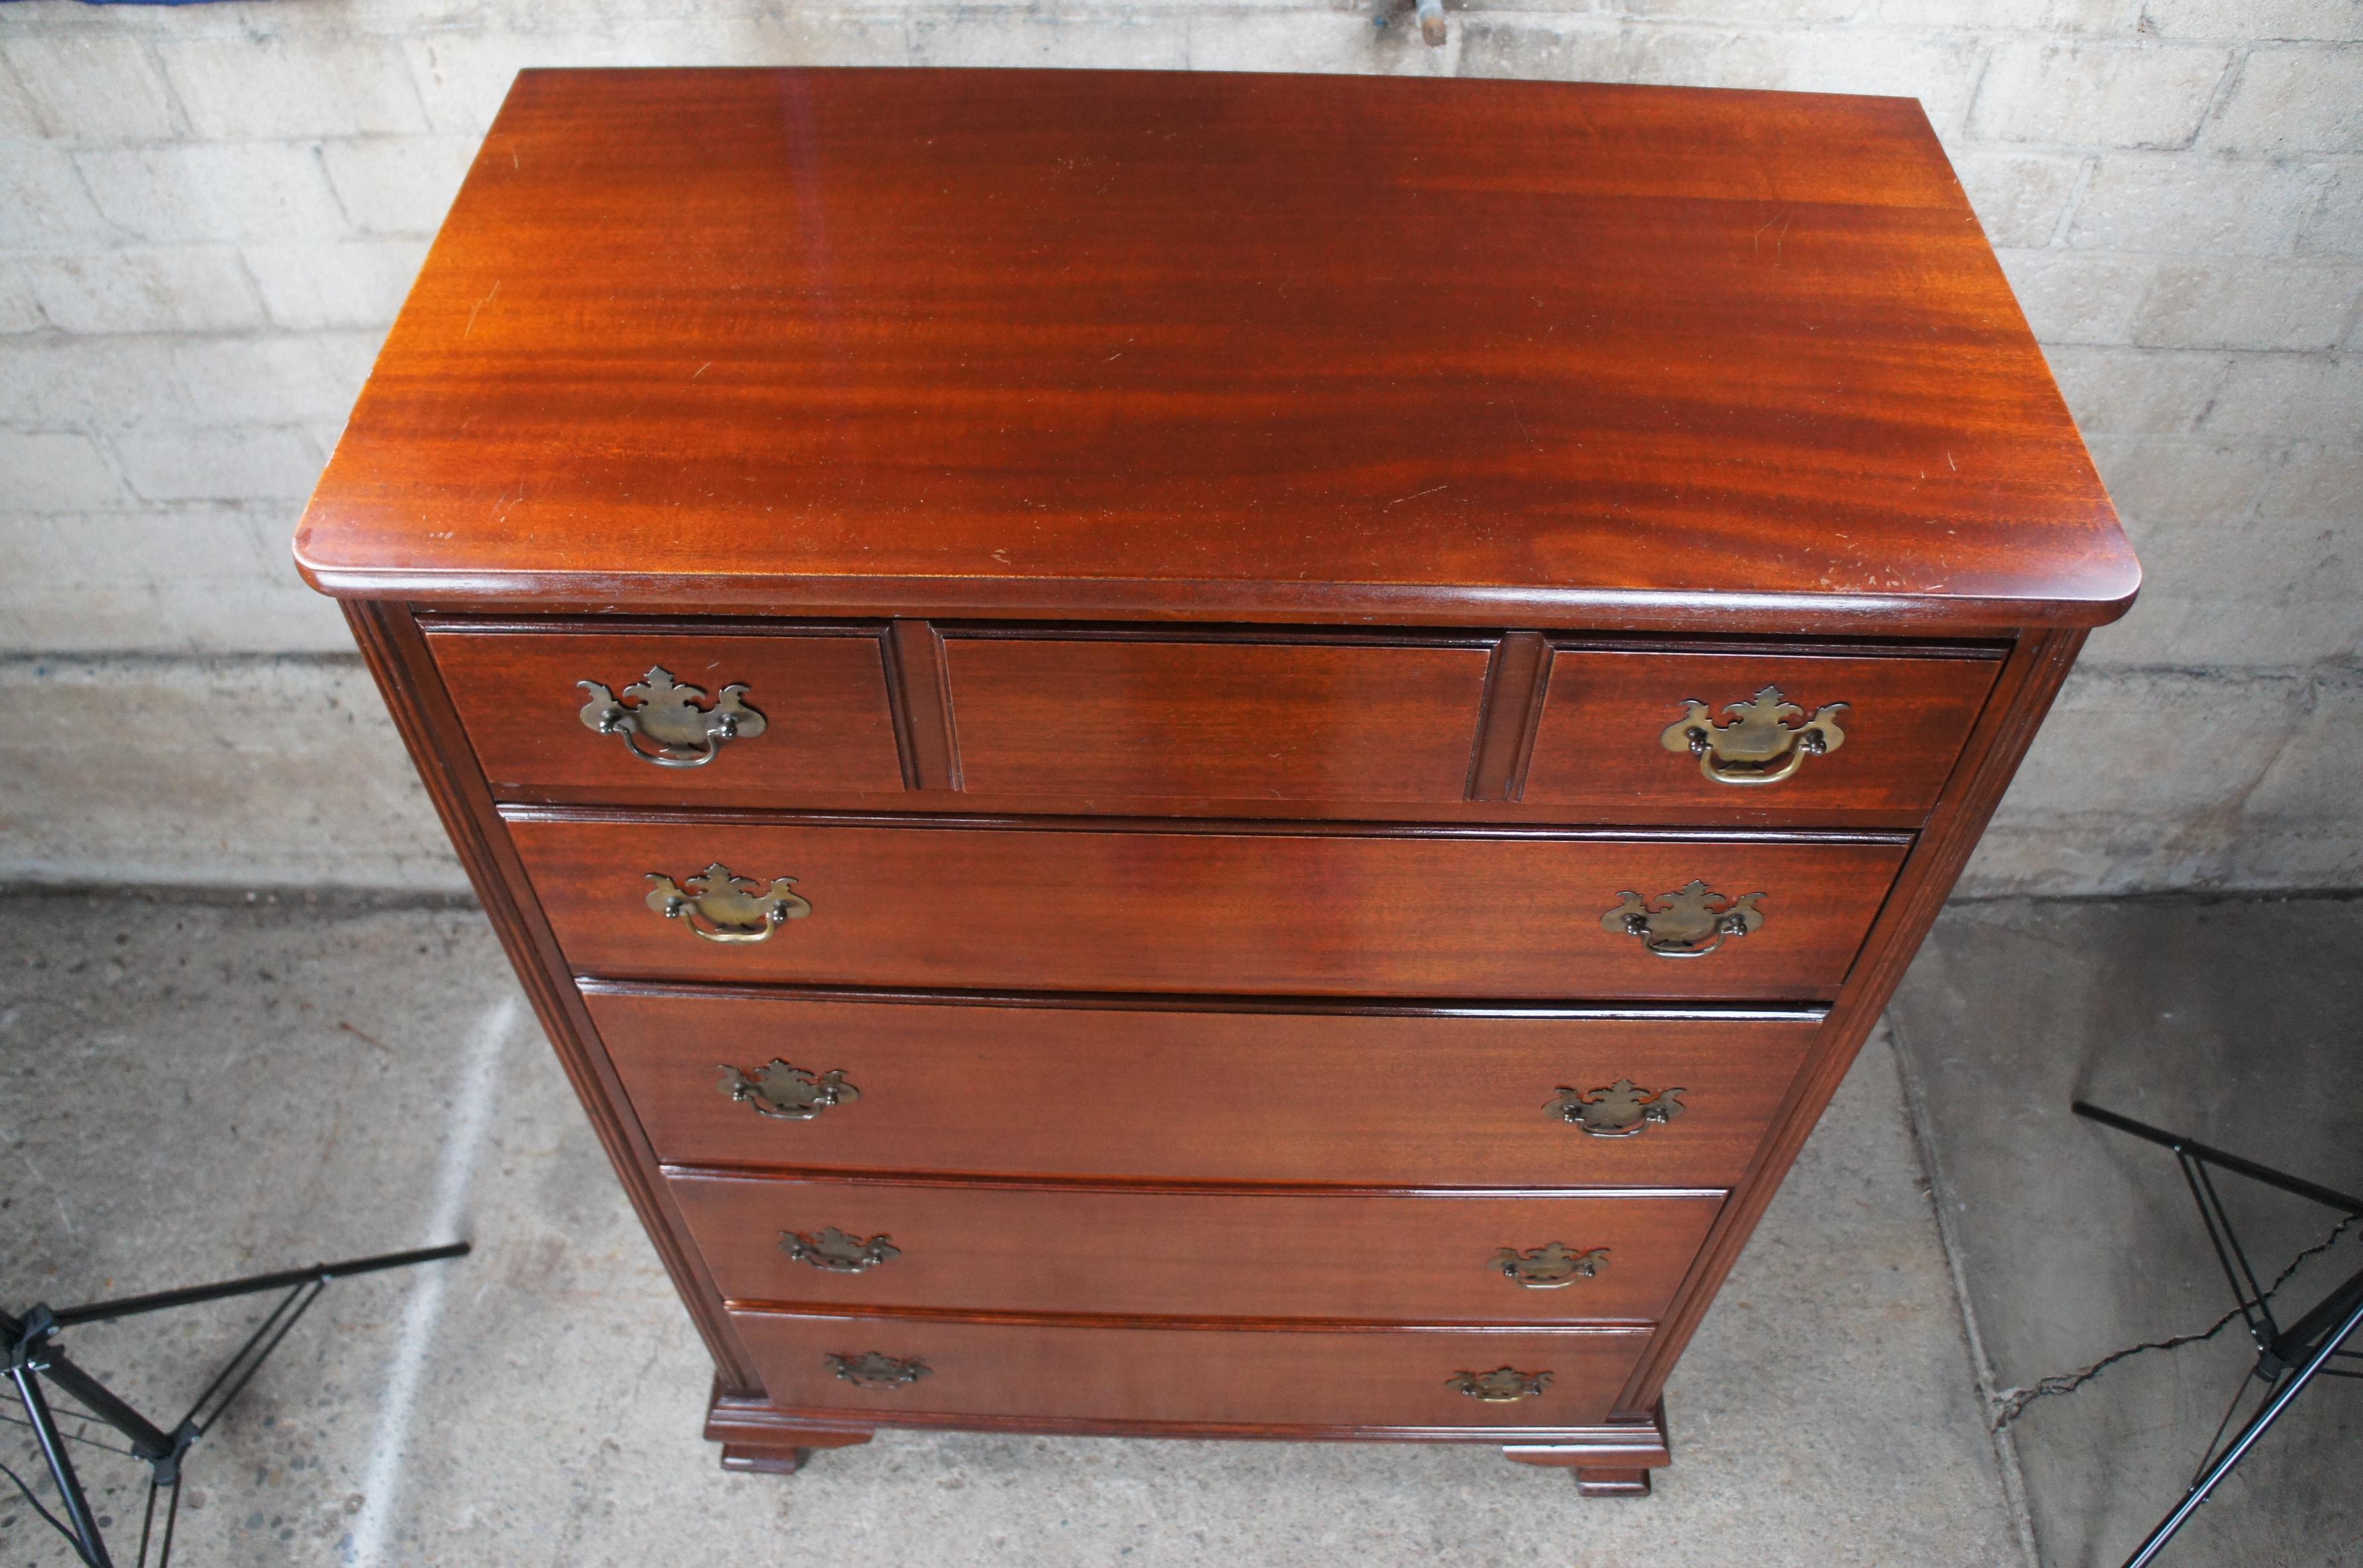 Antique Mahogany Chippendale Georgian Style Tallboy Dresser Chest of Drawers 50